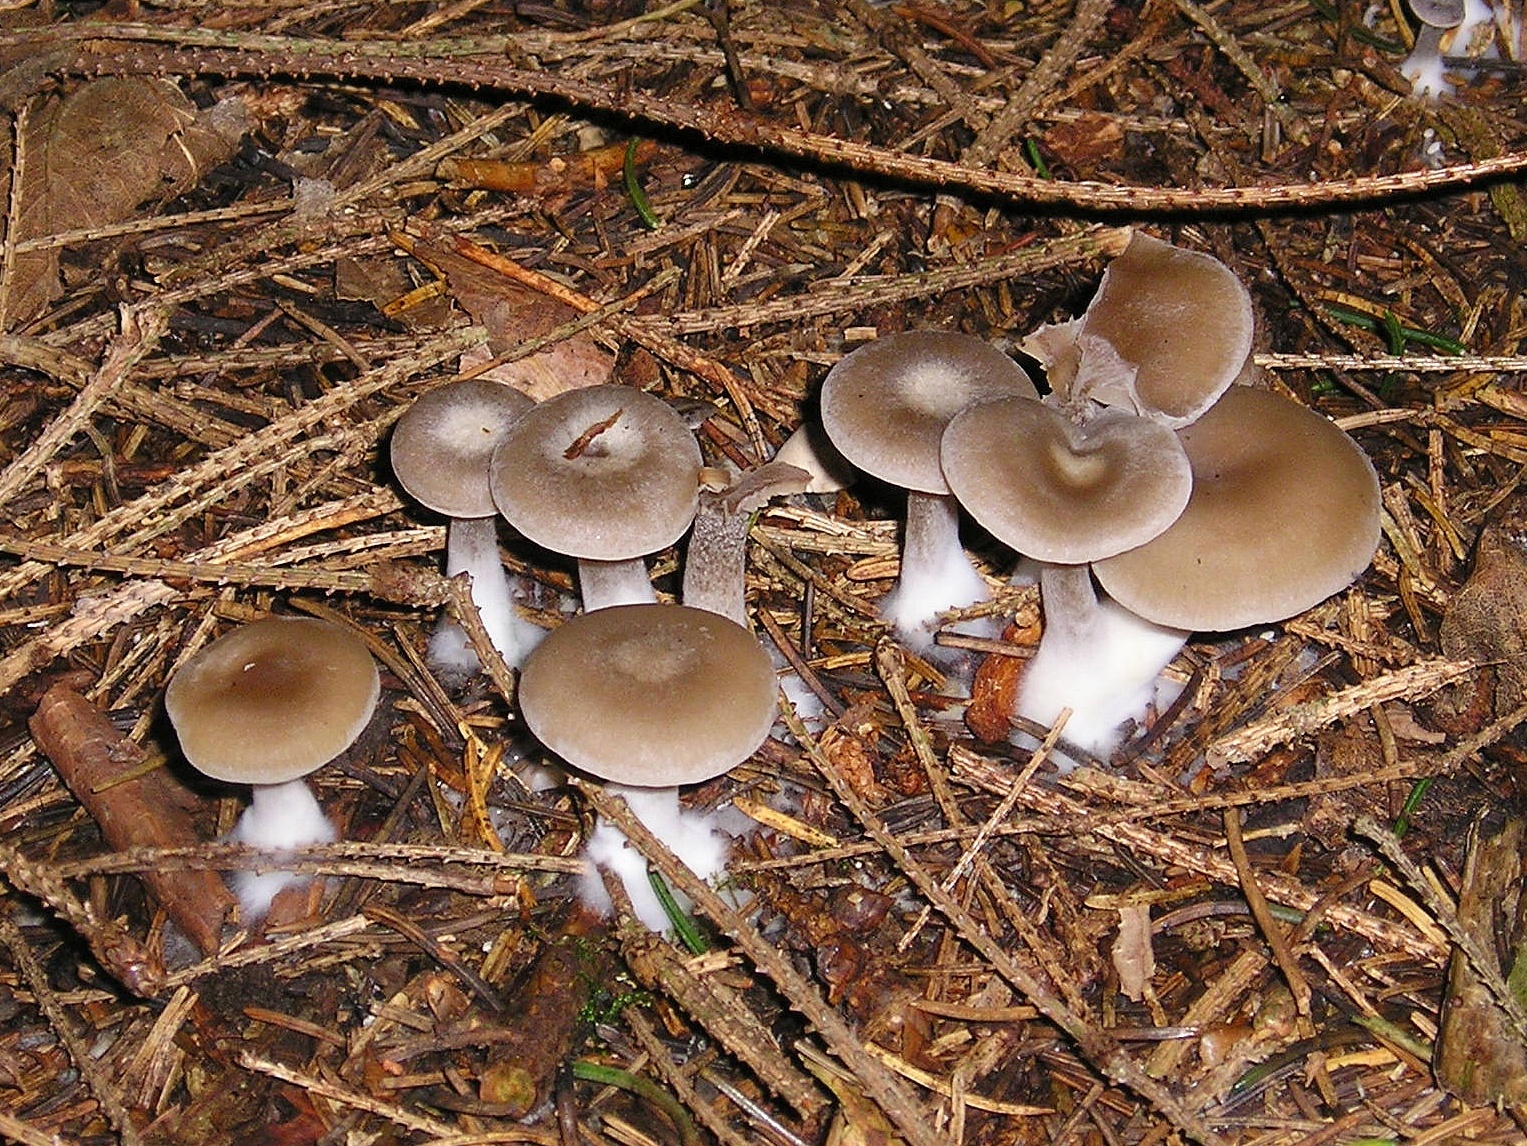 group of mushrooms in a grass field with dirt and sticks